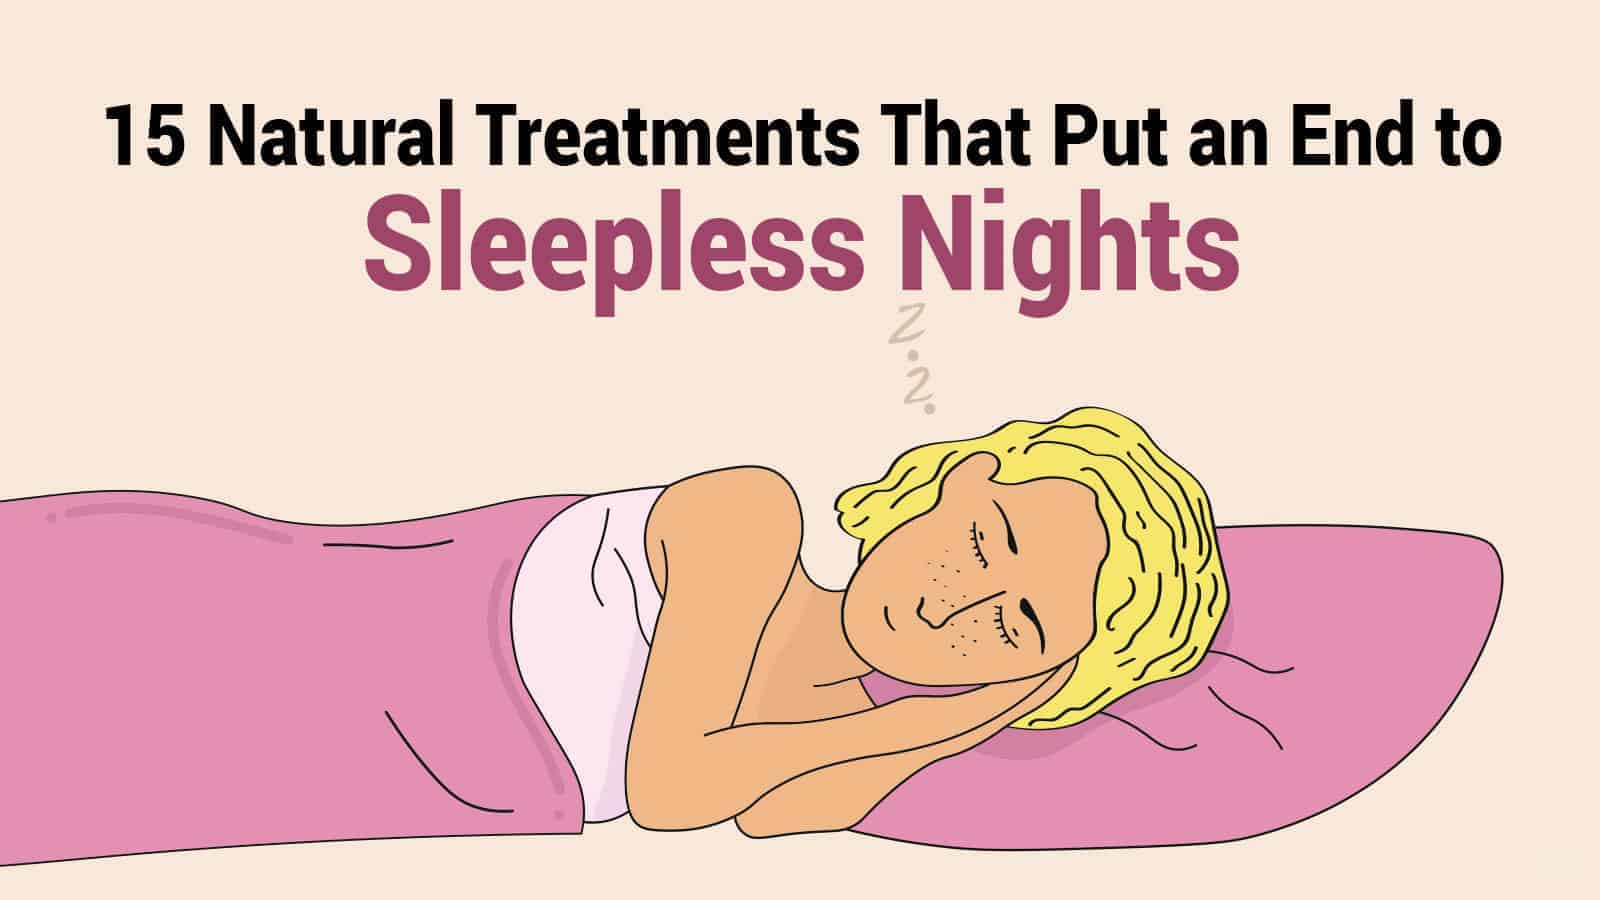 15 Natural Treatments That Put an End to Sleepless Nights